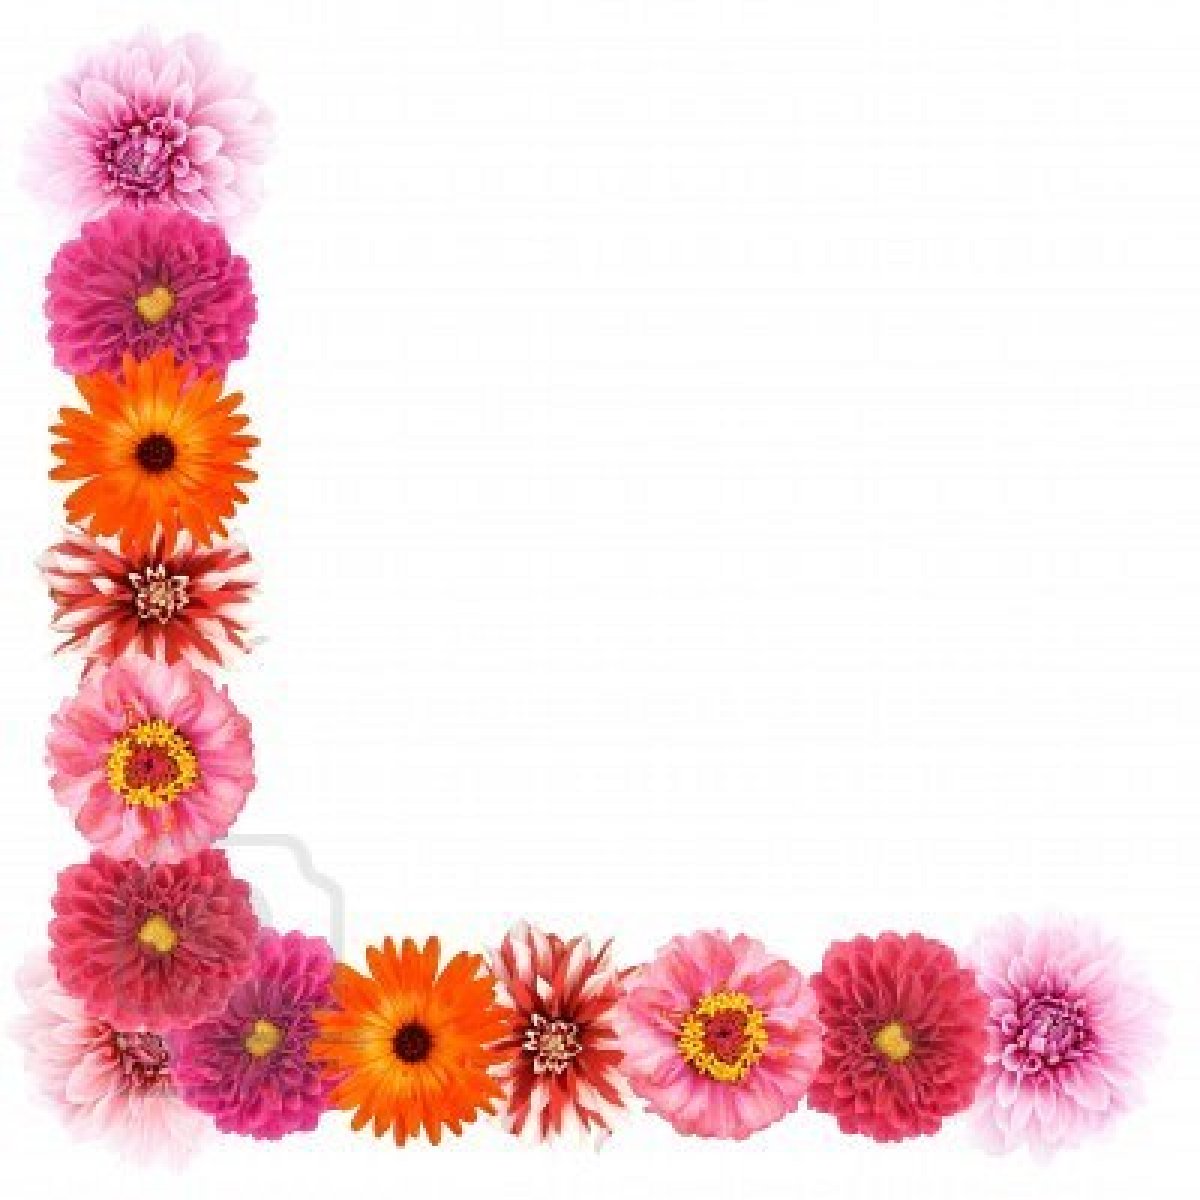 Pink and Yellow Flowers Border Design HD - Border Designs